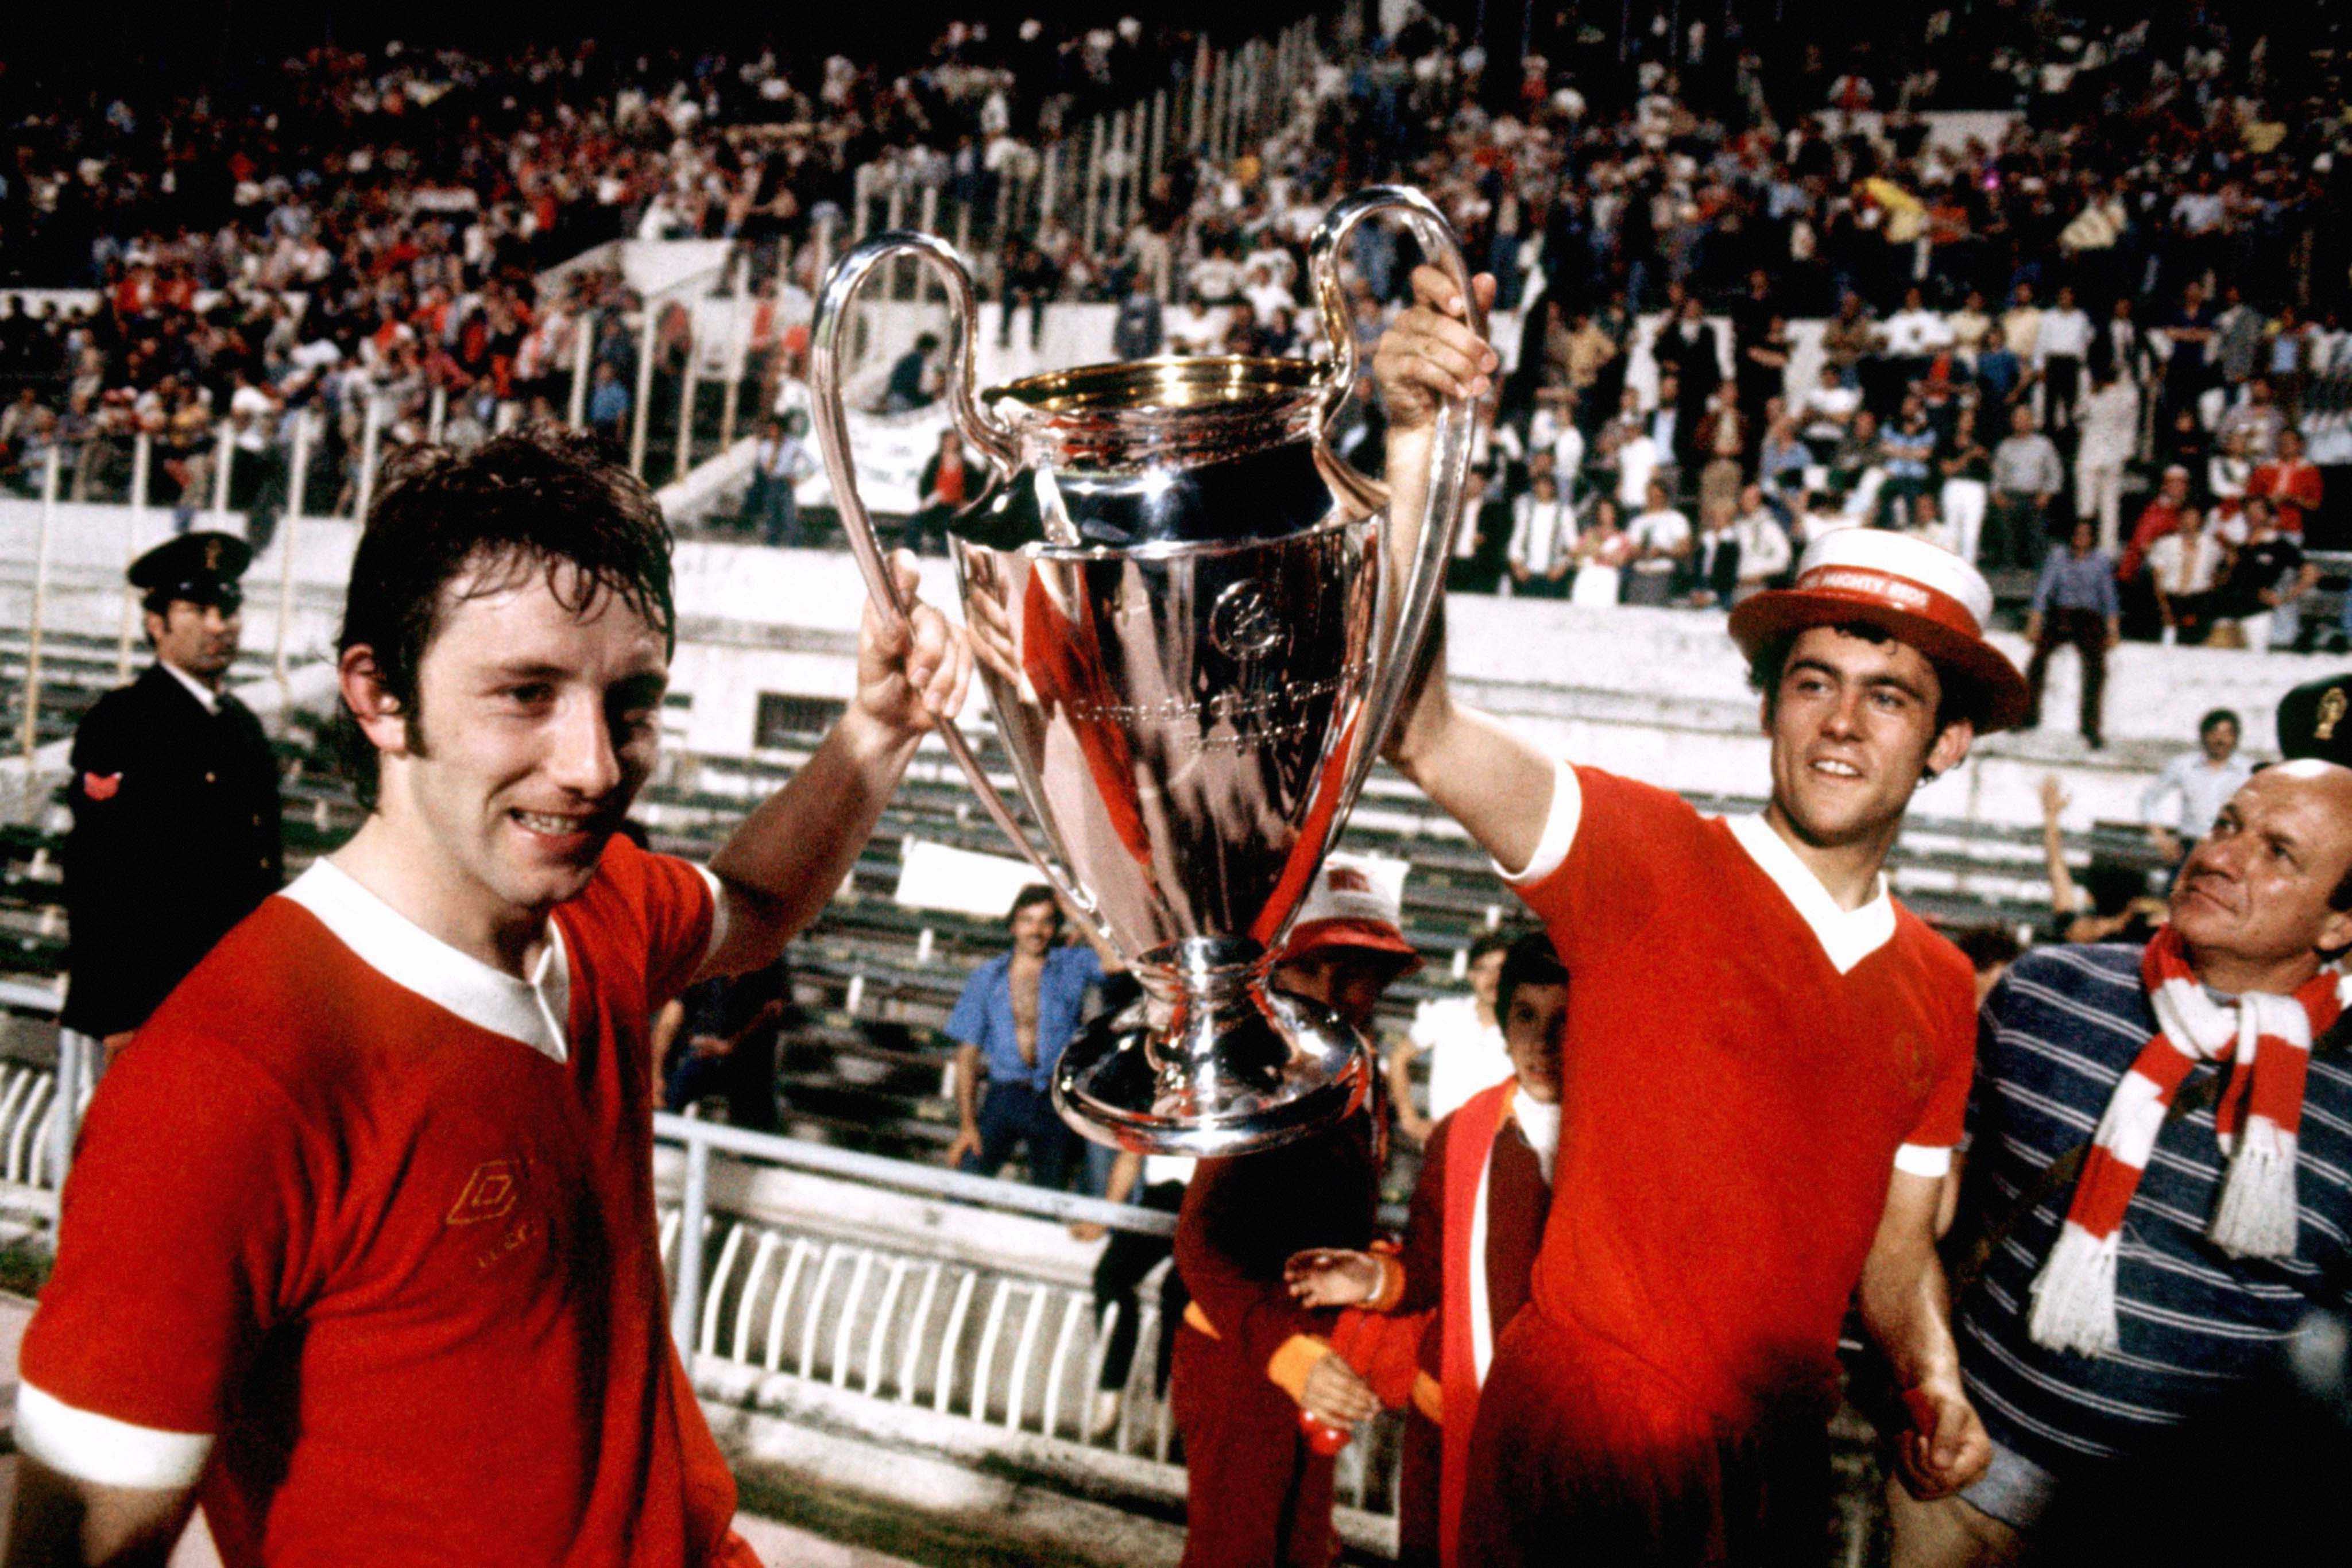 JIMMY CASE: LIVERPOOL FANS, ROME 1977 AND HOW KEVIN KEEGAN GOT A BLACK EYE